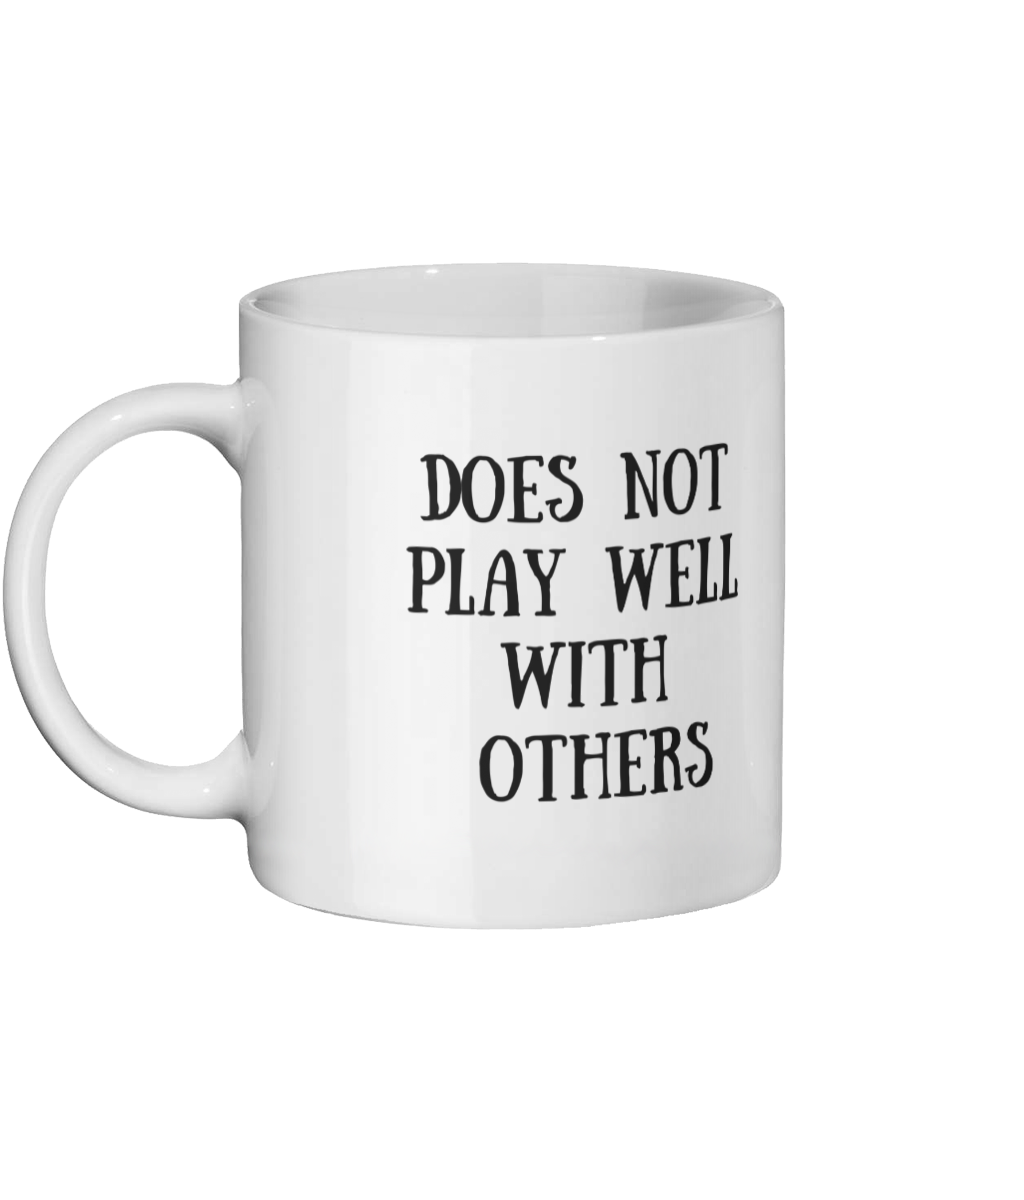 Does Not Play Well With Others Mug Left-side